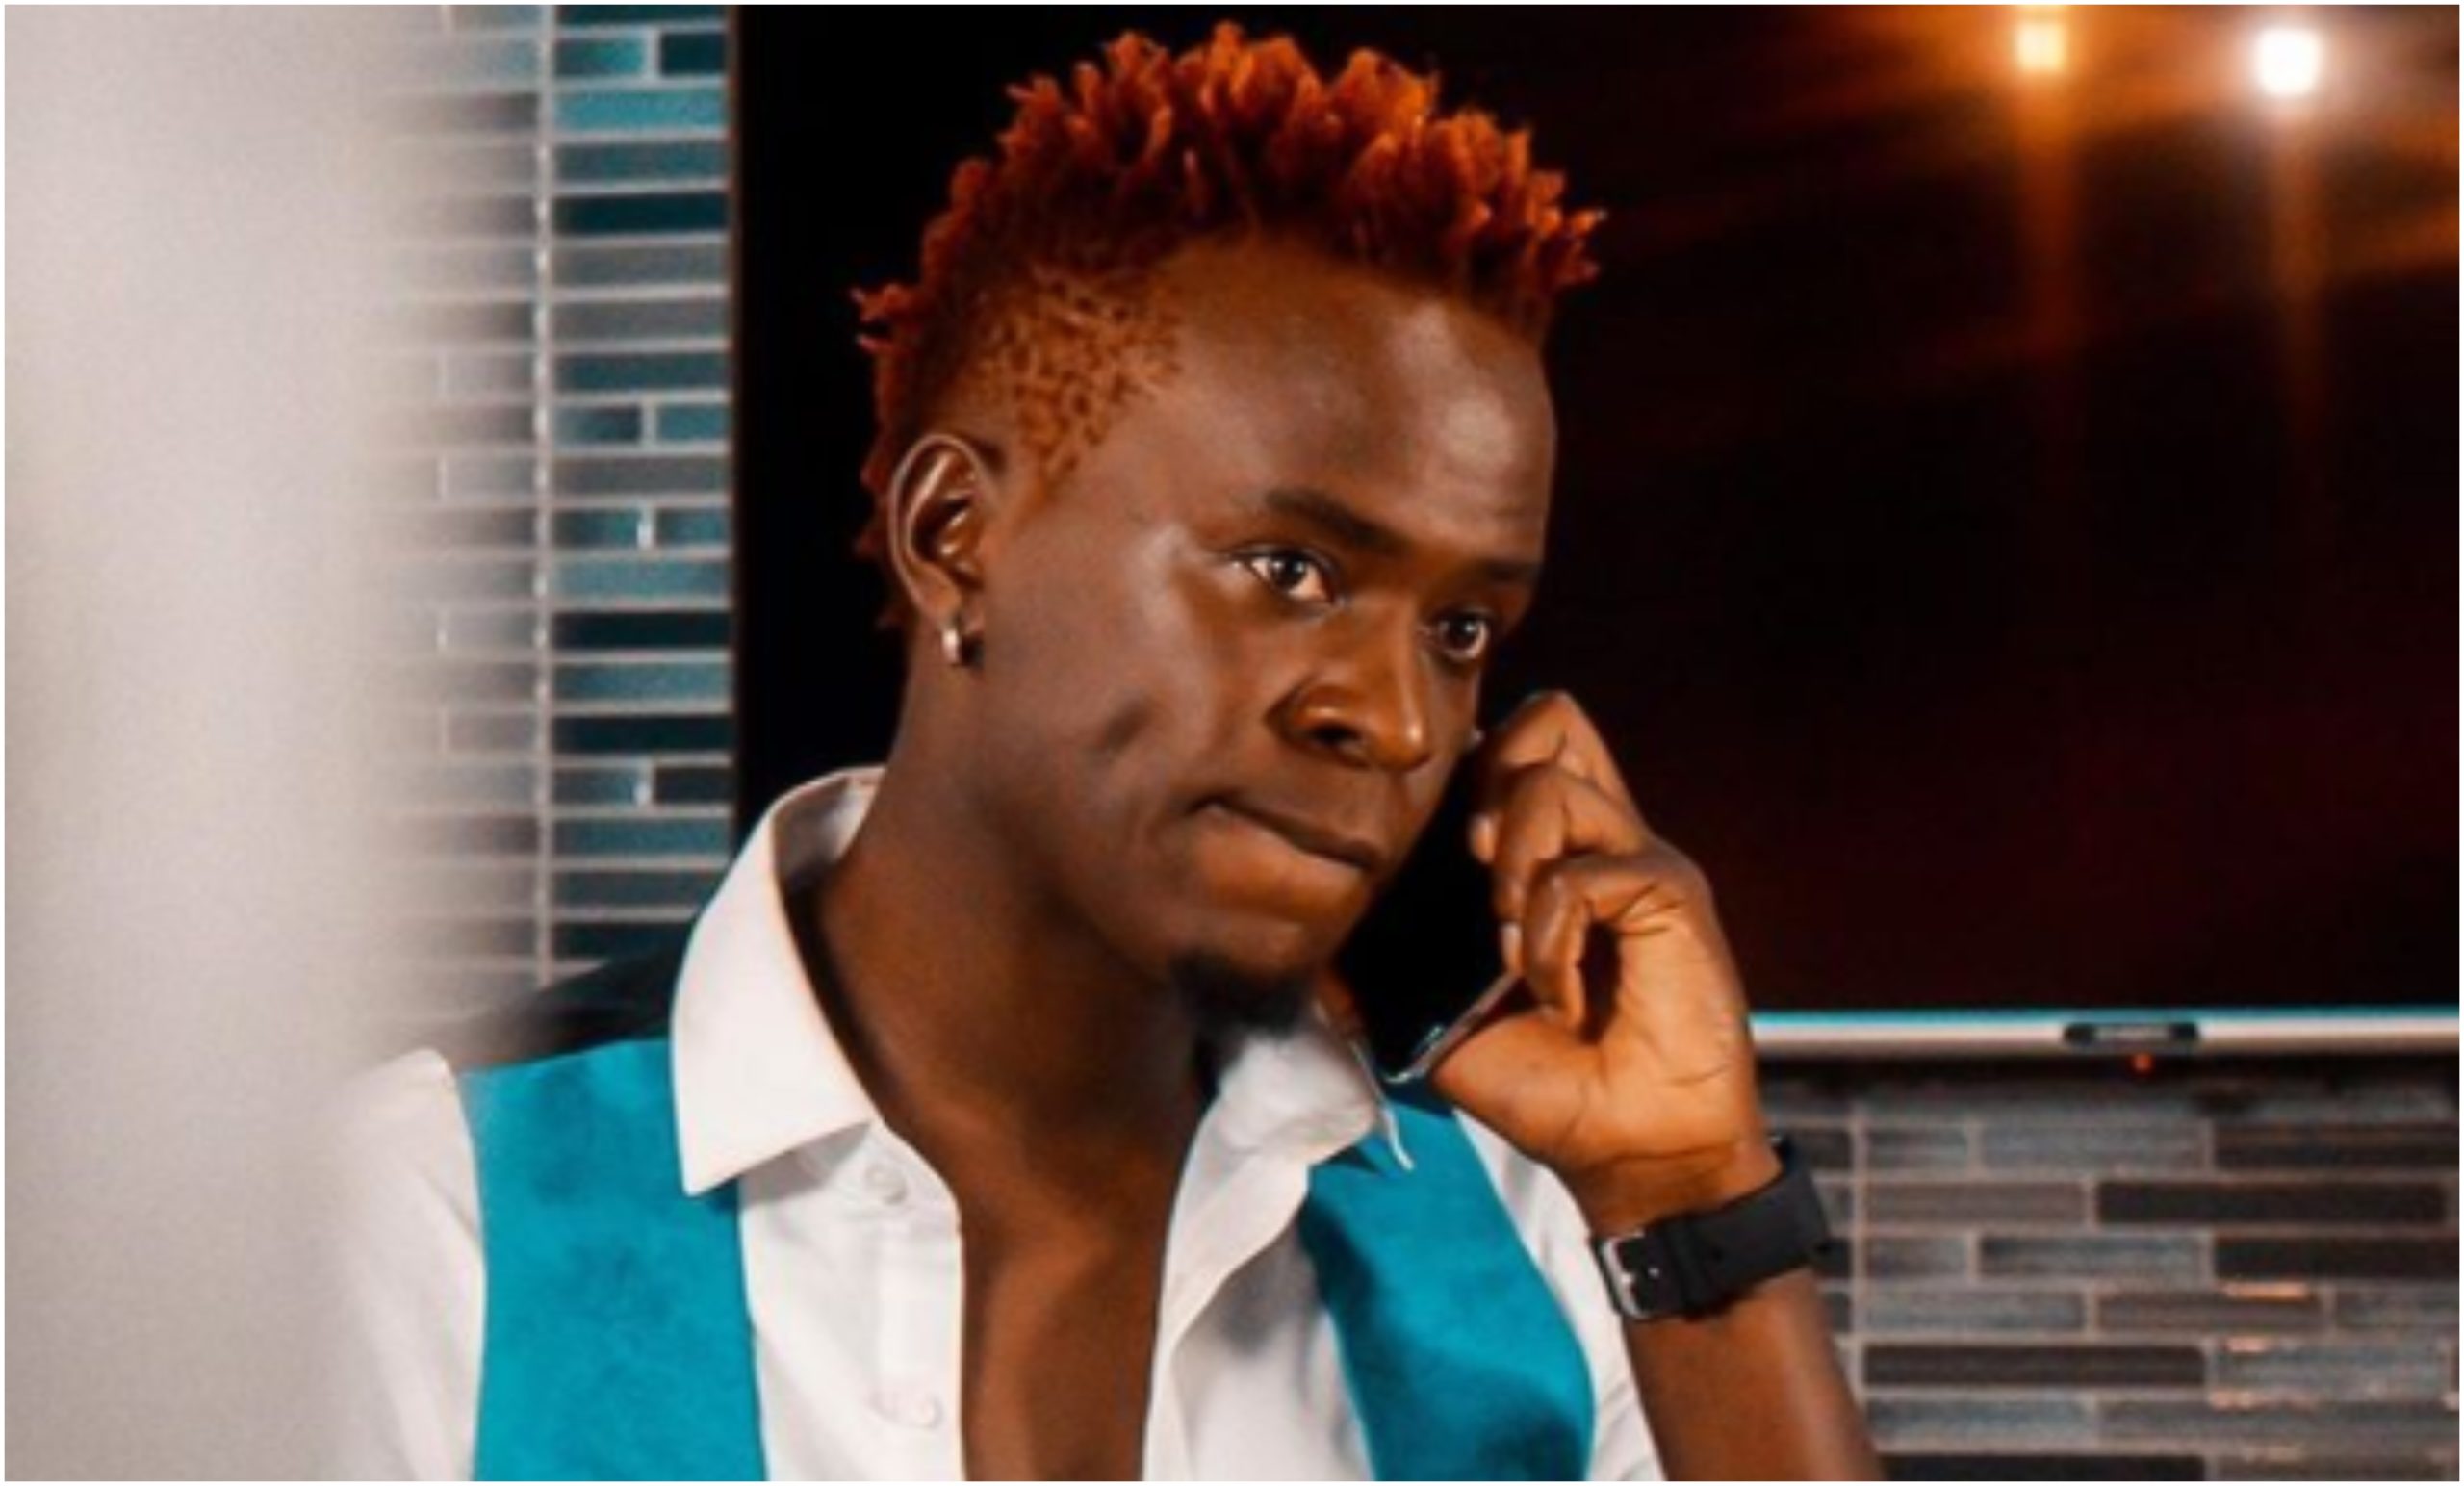 Fisi ni fisi tu! Willy Paul exposed for sliding in the DMs again! (Screenshots)